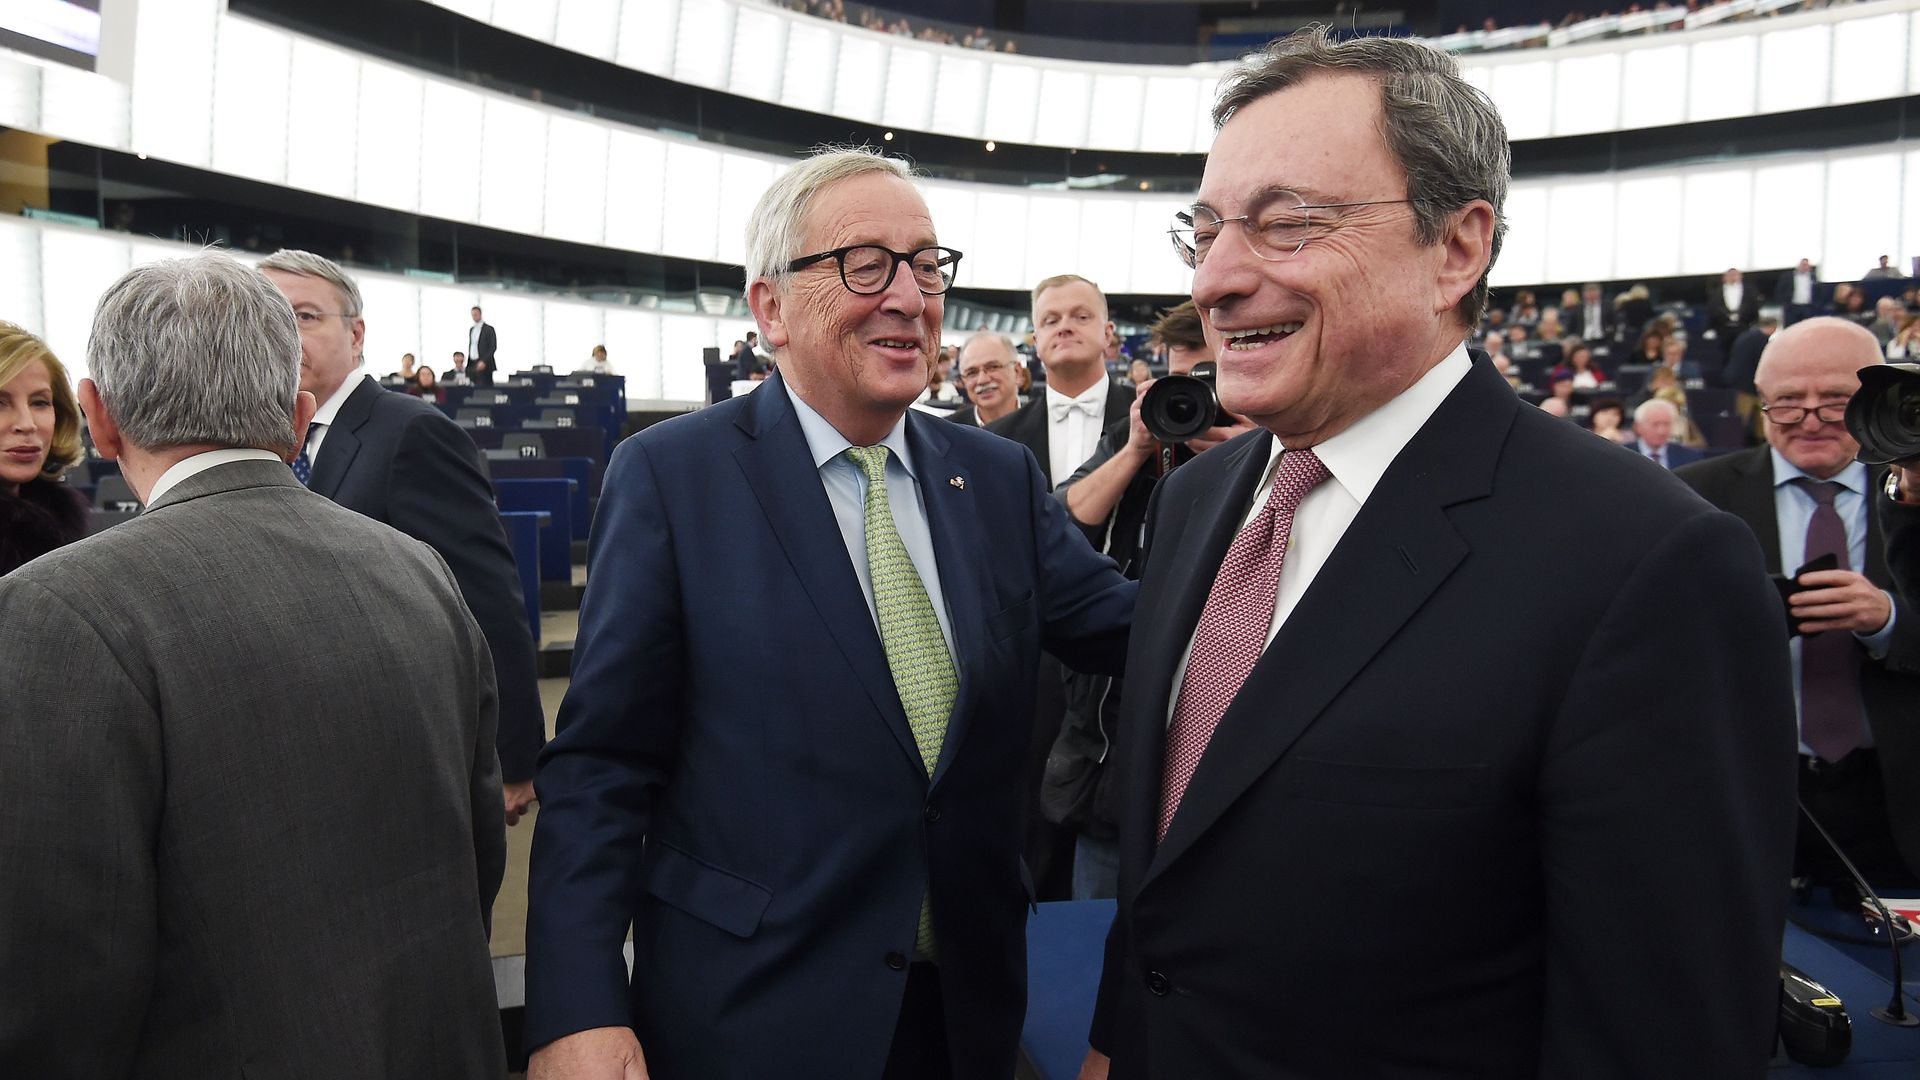 European Commission President Jean-Claude Juncker (L) and President of the European Central Bank (ECB) Mario Draghi.